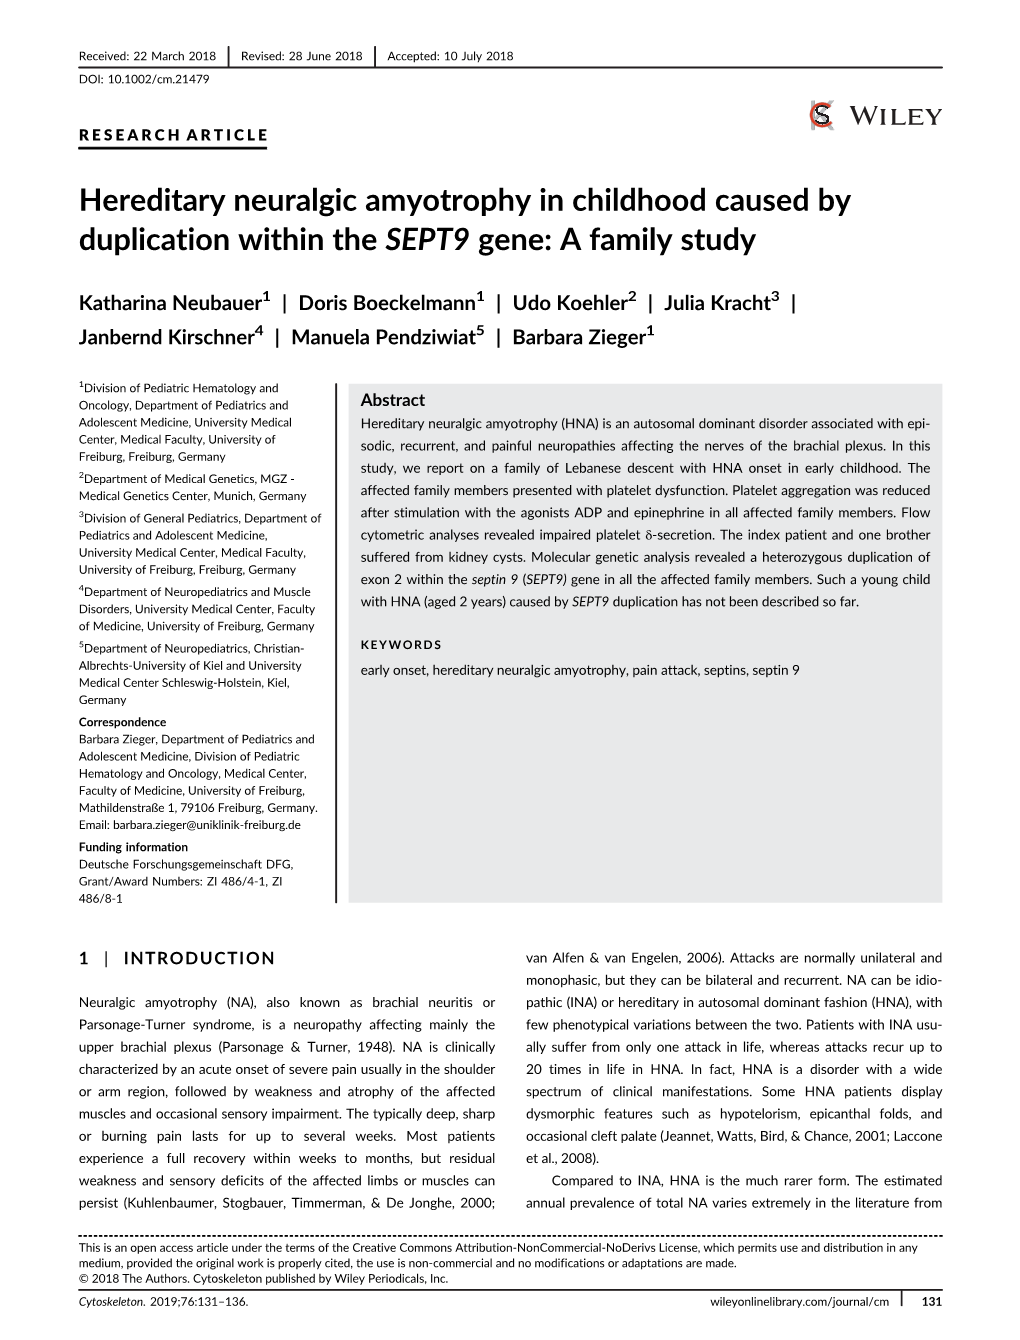 Hereditary Neuralgic Amyotrophy in Childhood Caused by Duplication Within the SEPT9 Gene: a Family Study